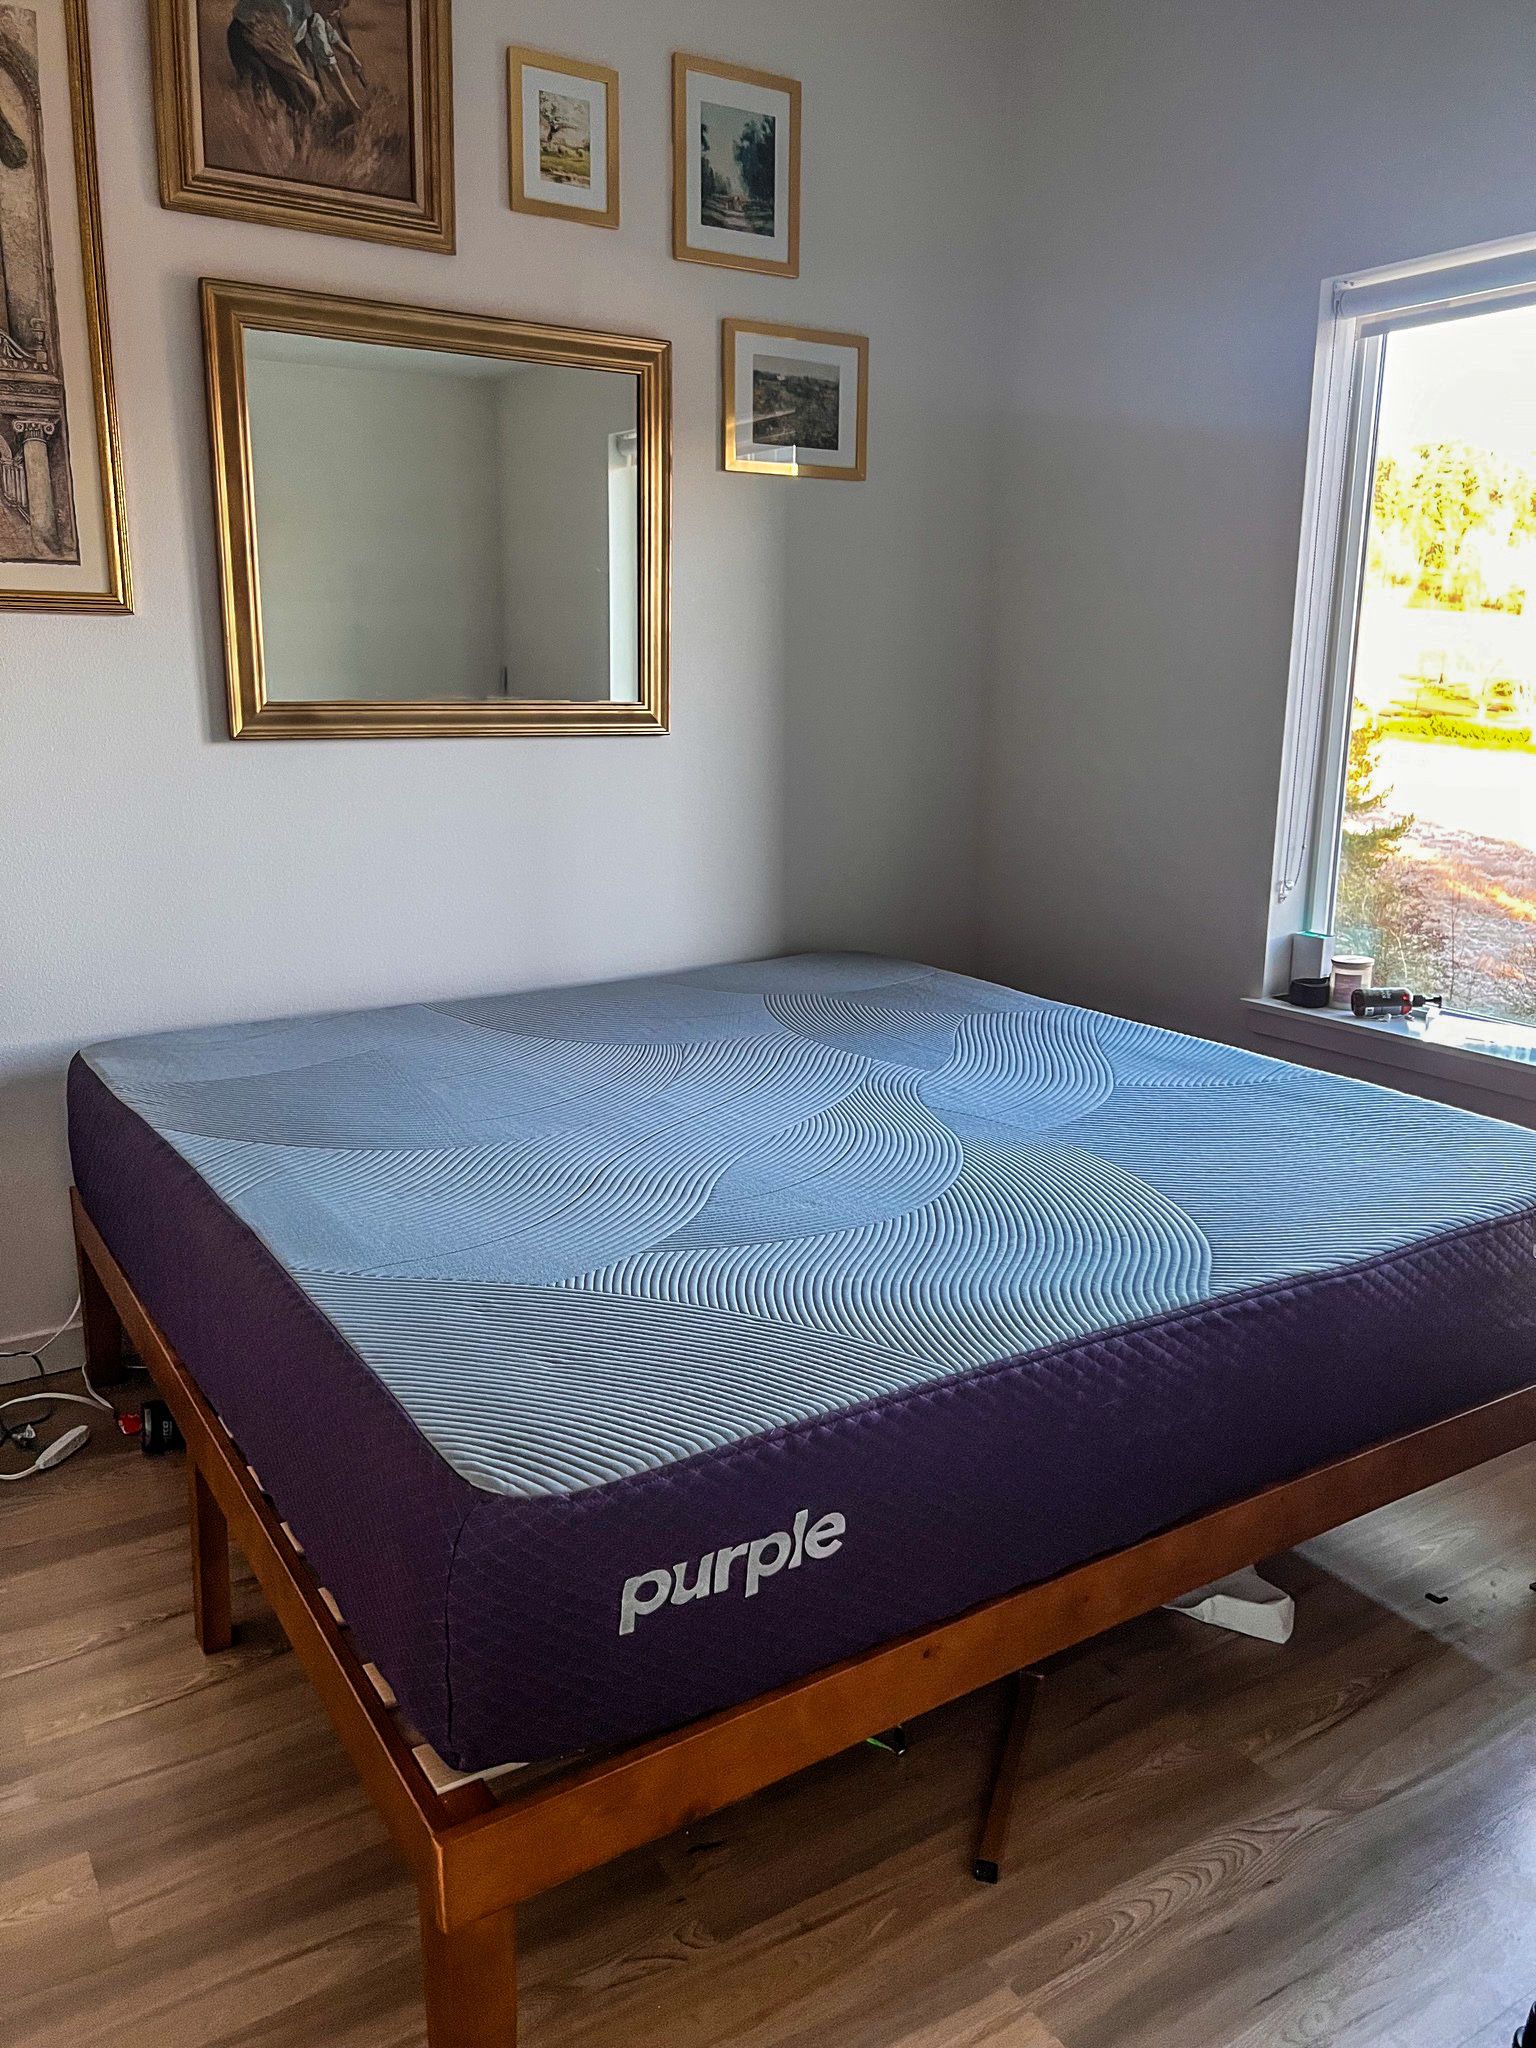 Purple Premier Queen, Restore Plus Firm Queen, Gel Technology Mattress, Like New,**Authentic Badge**, Same Day Delivery Available, 7 Days a Week  